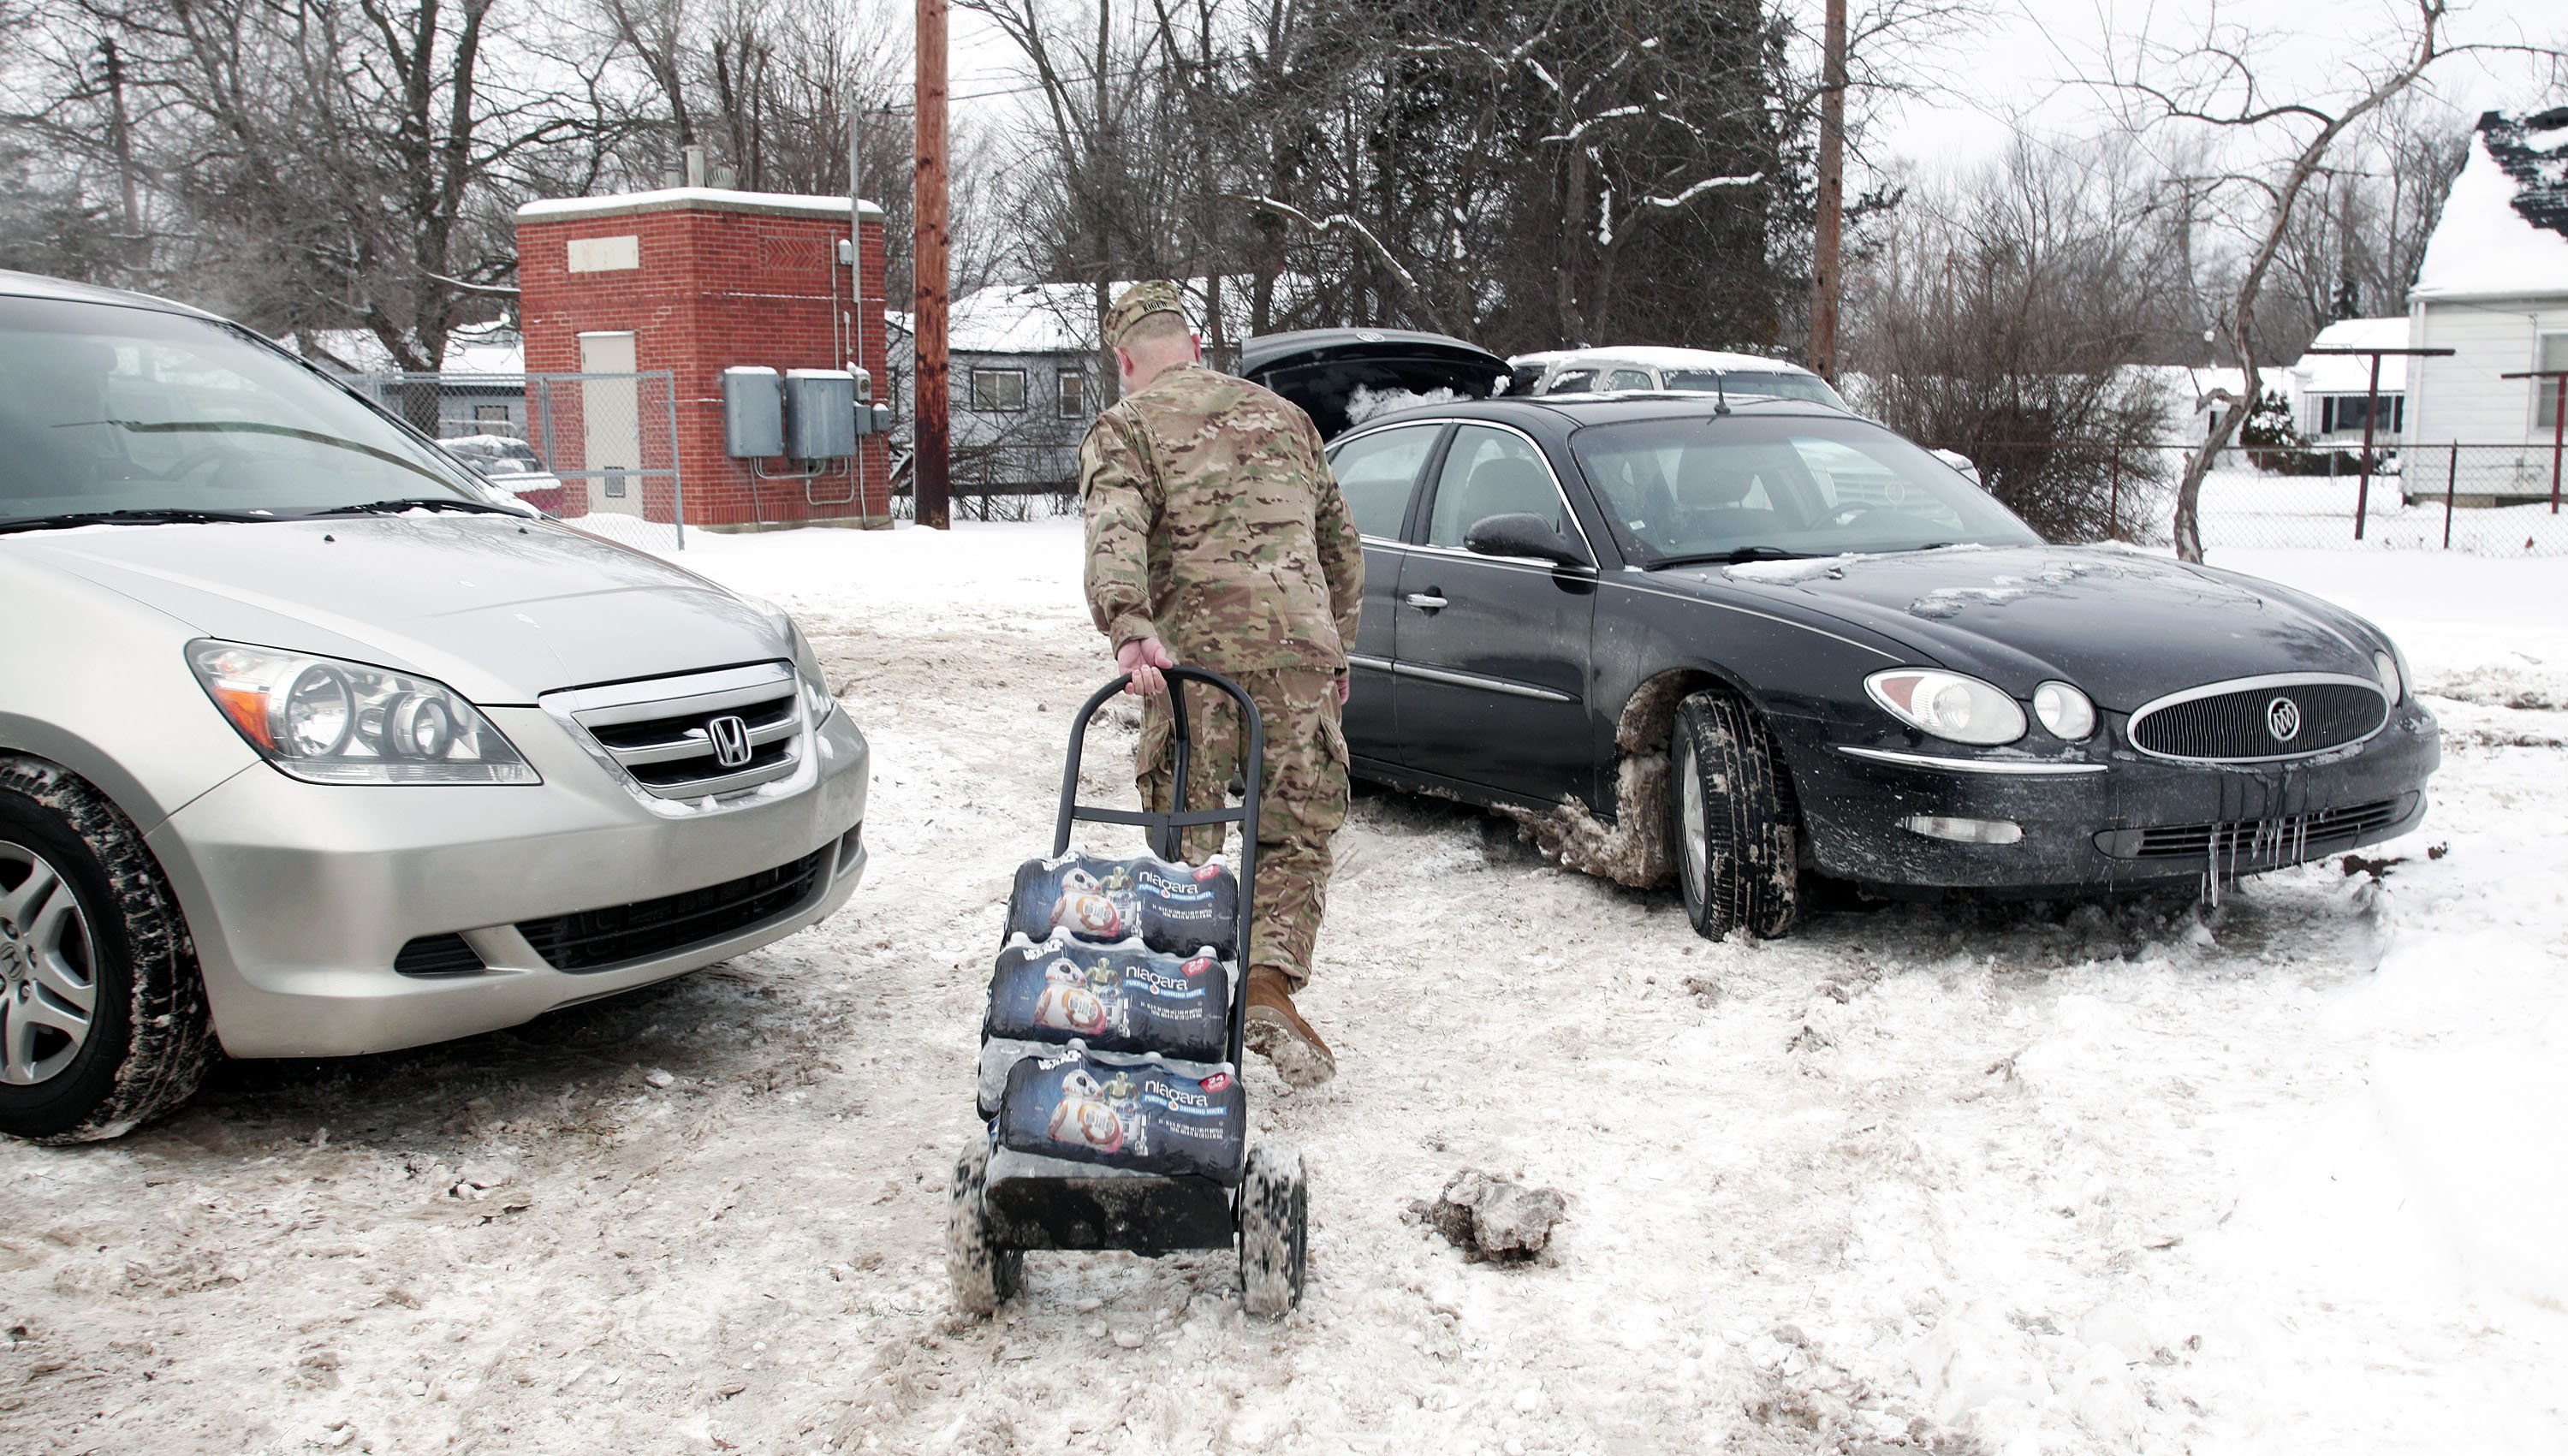 Michigan National Guard Staff Sergeant Steve Kiger of Beaverton, Michigan, helps Christine Brown of Flint, Michigan take bottled water out to her car after she received it at a Flint Fire Station on Jan 13, 2016 in Flint, Michigan.